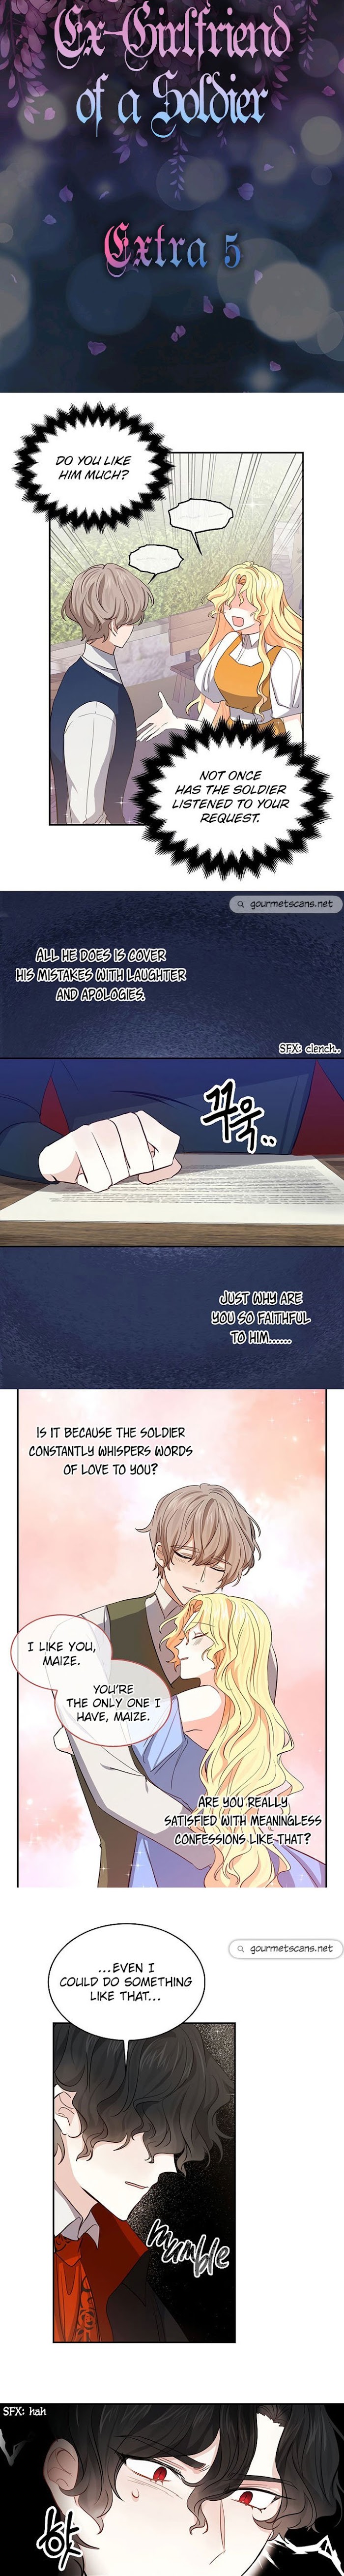 I’M The Ex-Girlfriend Of A Soldier - Page 2